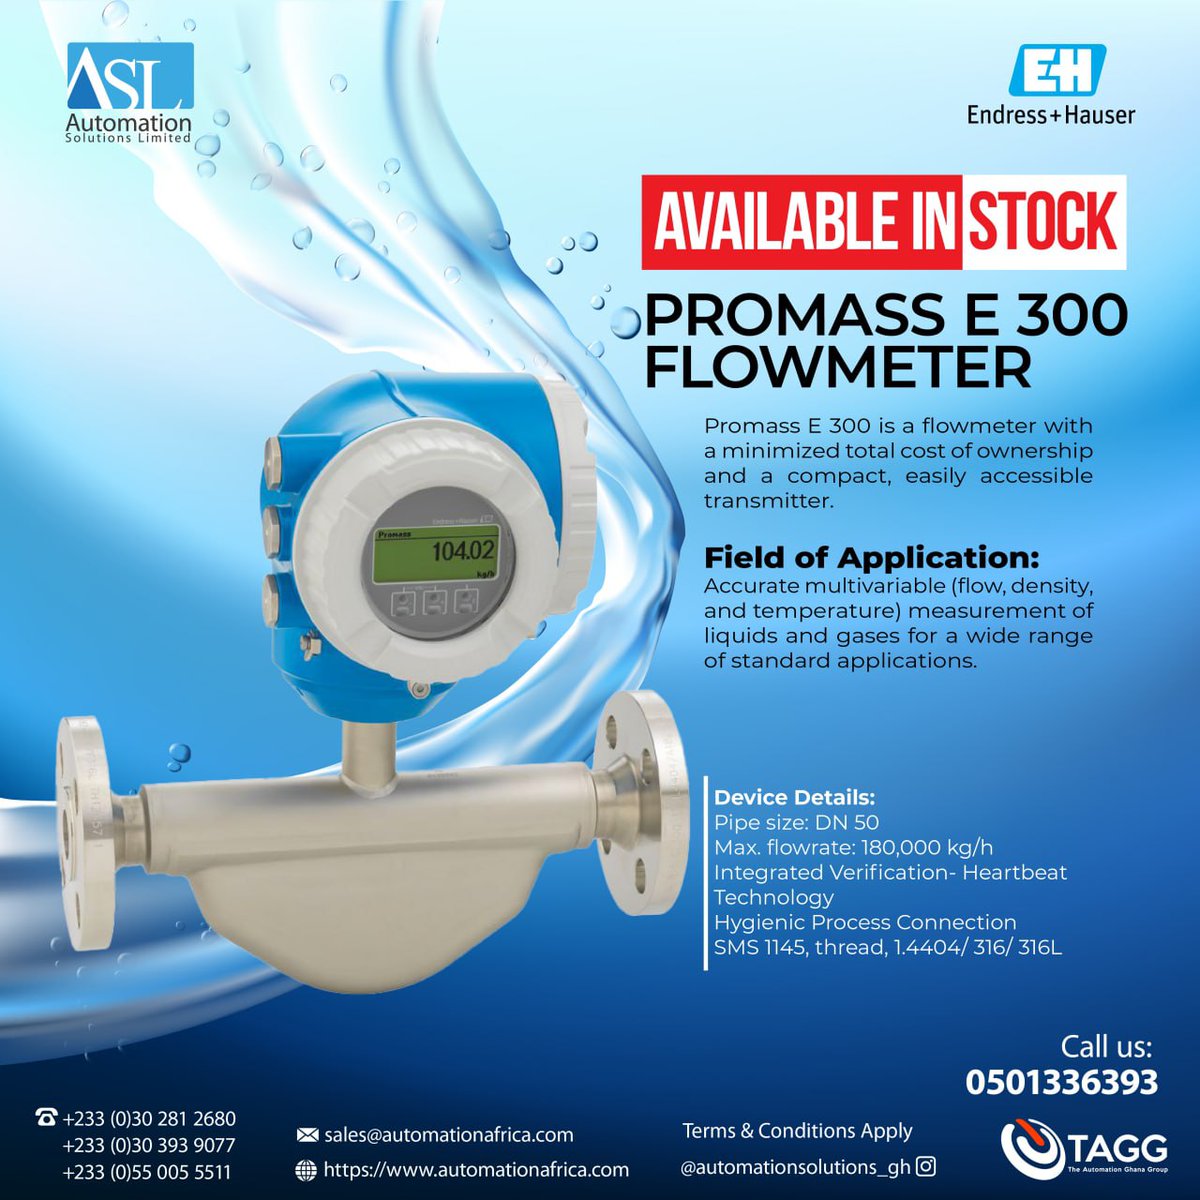 For accuracy and many more.
Promass E 300 Flowmeter is available in stock!
#endresshauser #instrumentation #smartsolutions